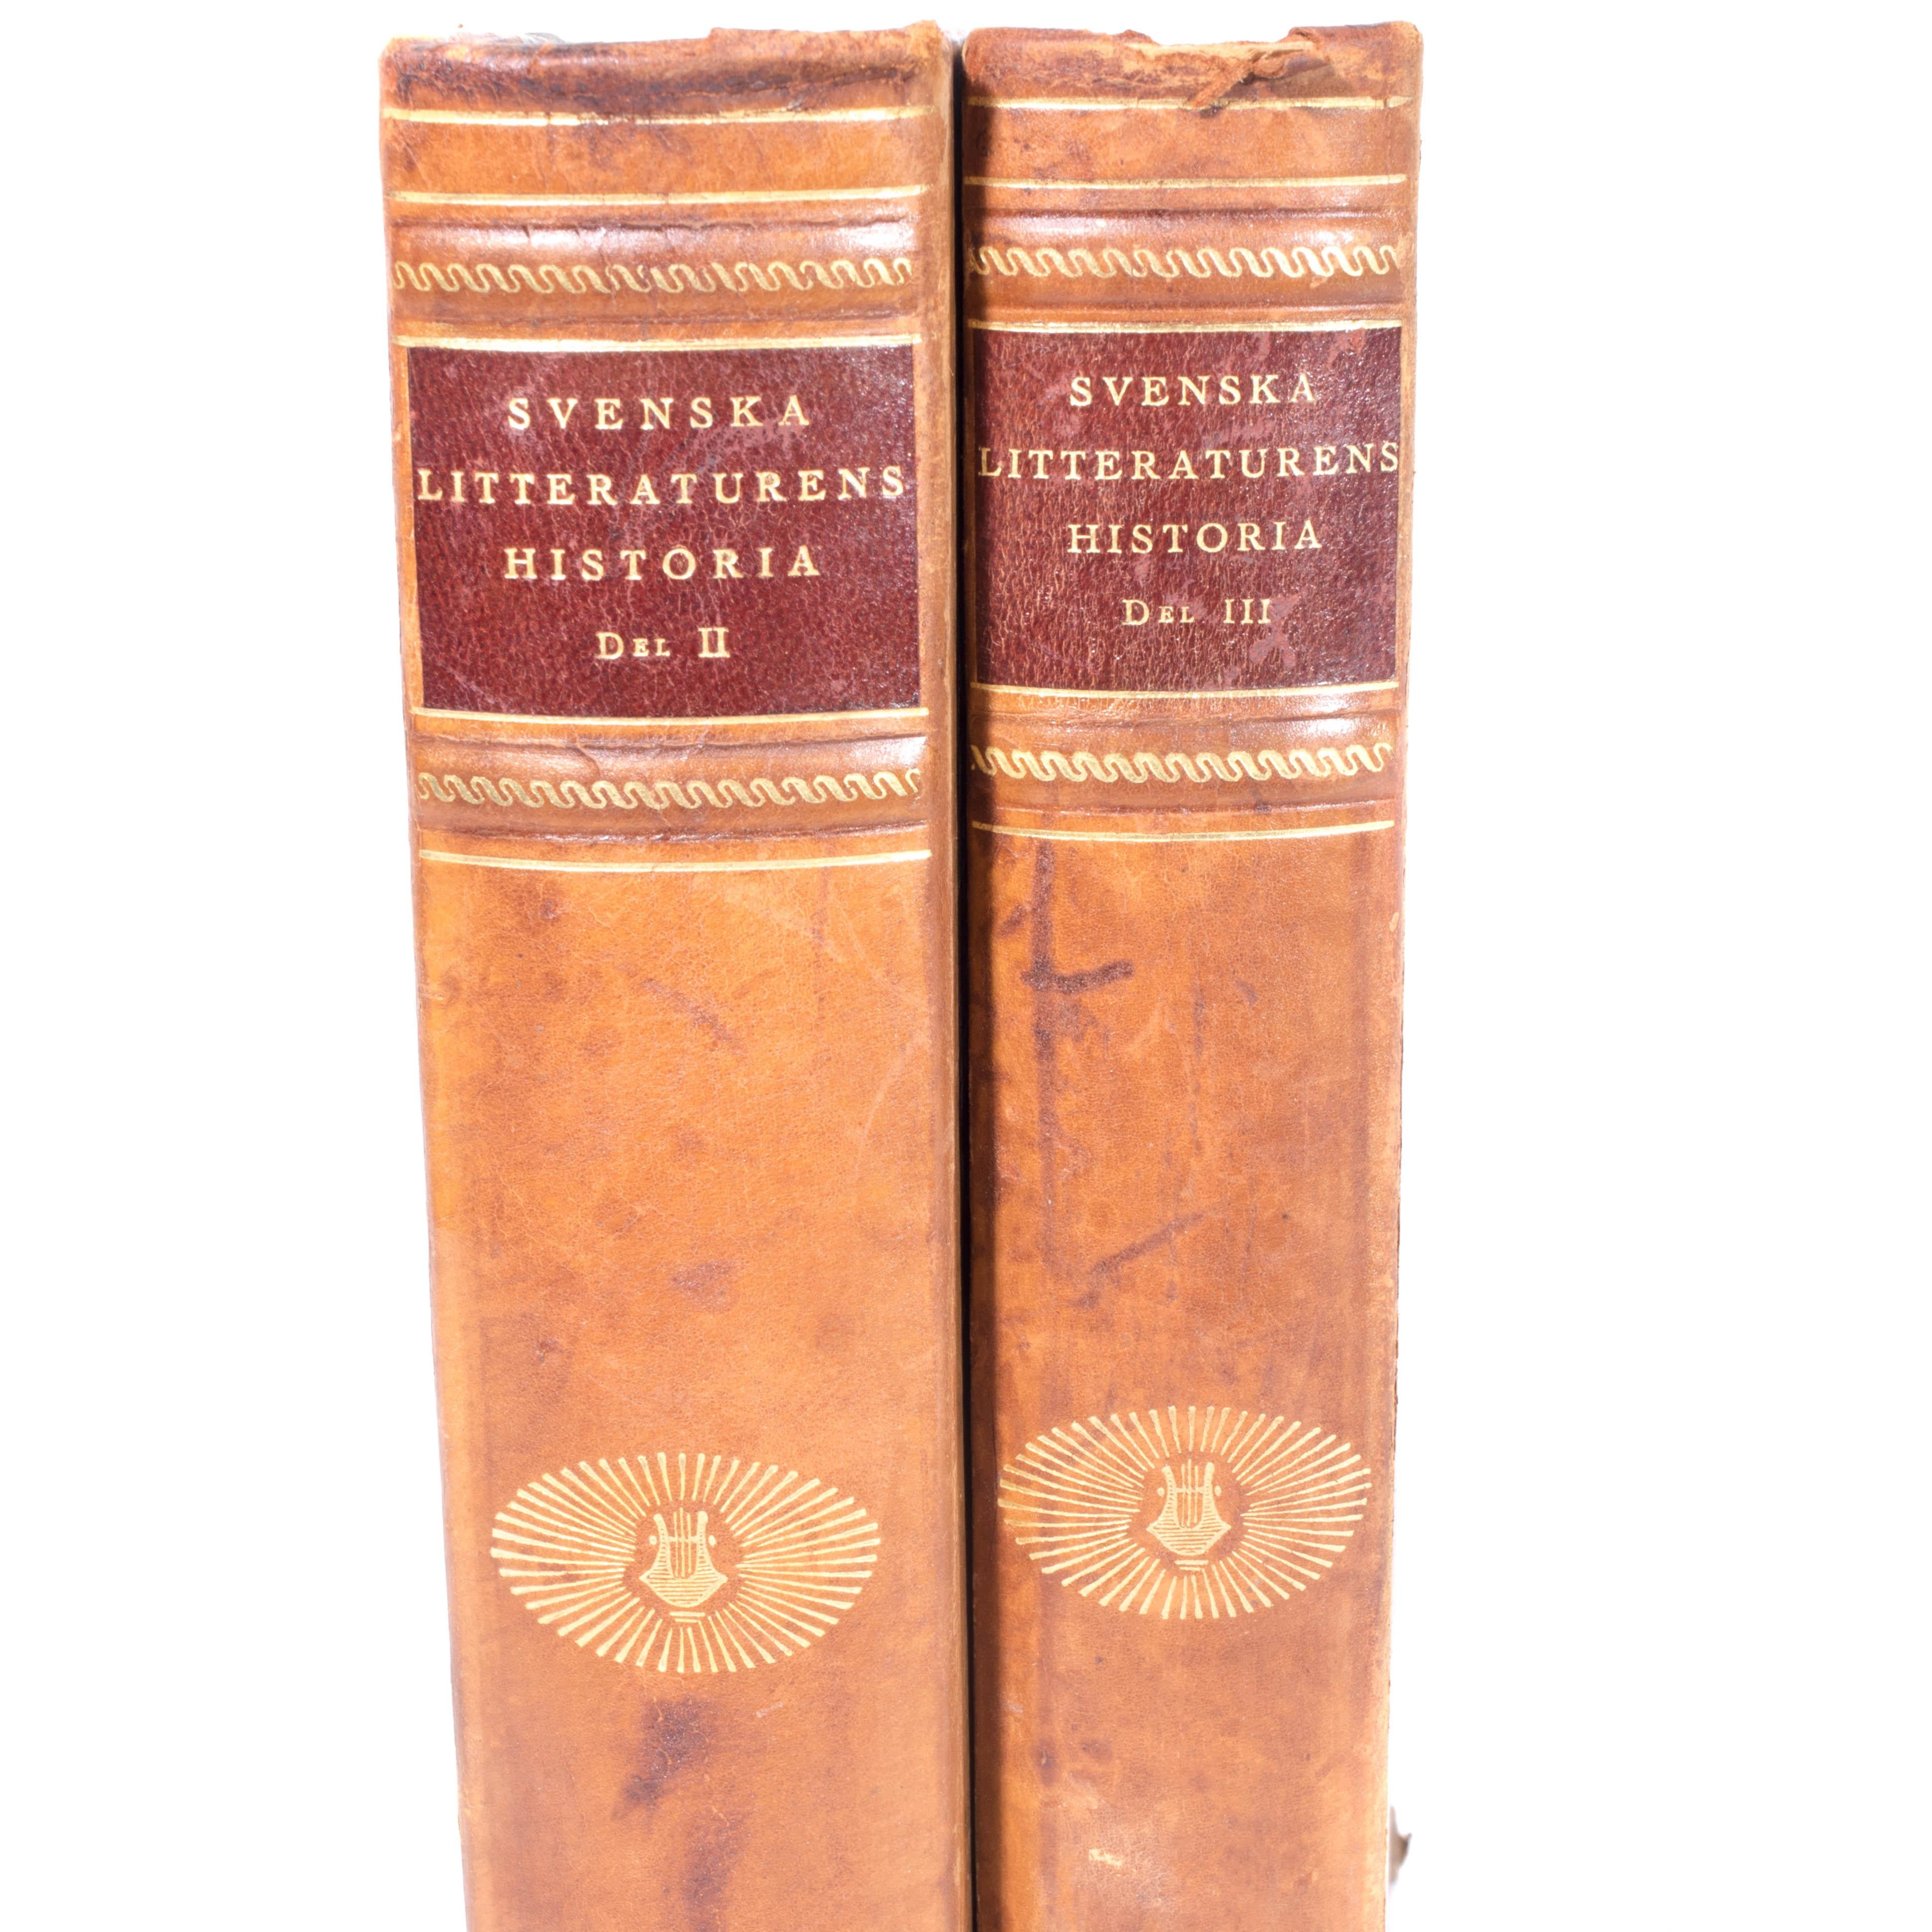 Swedish Antique Leather-Bound Books from Sweden